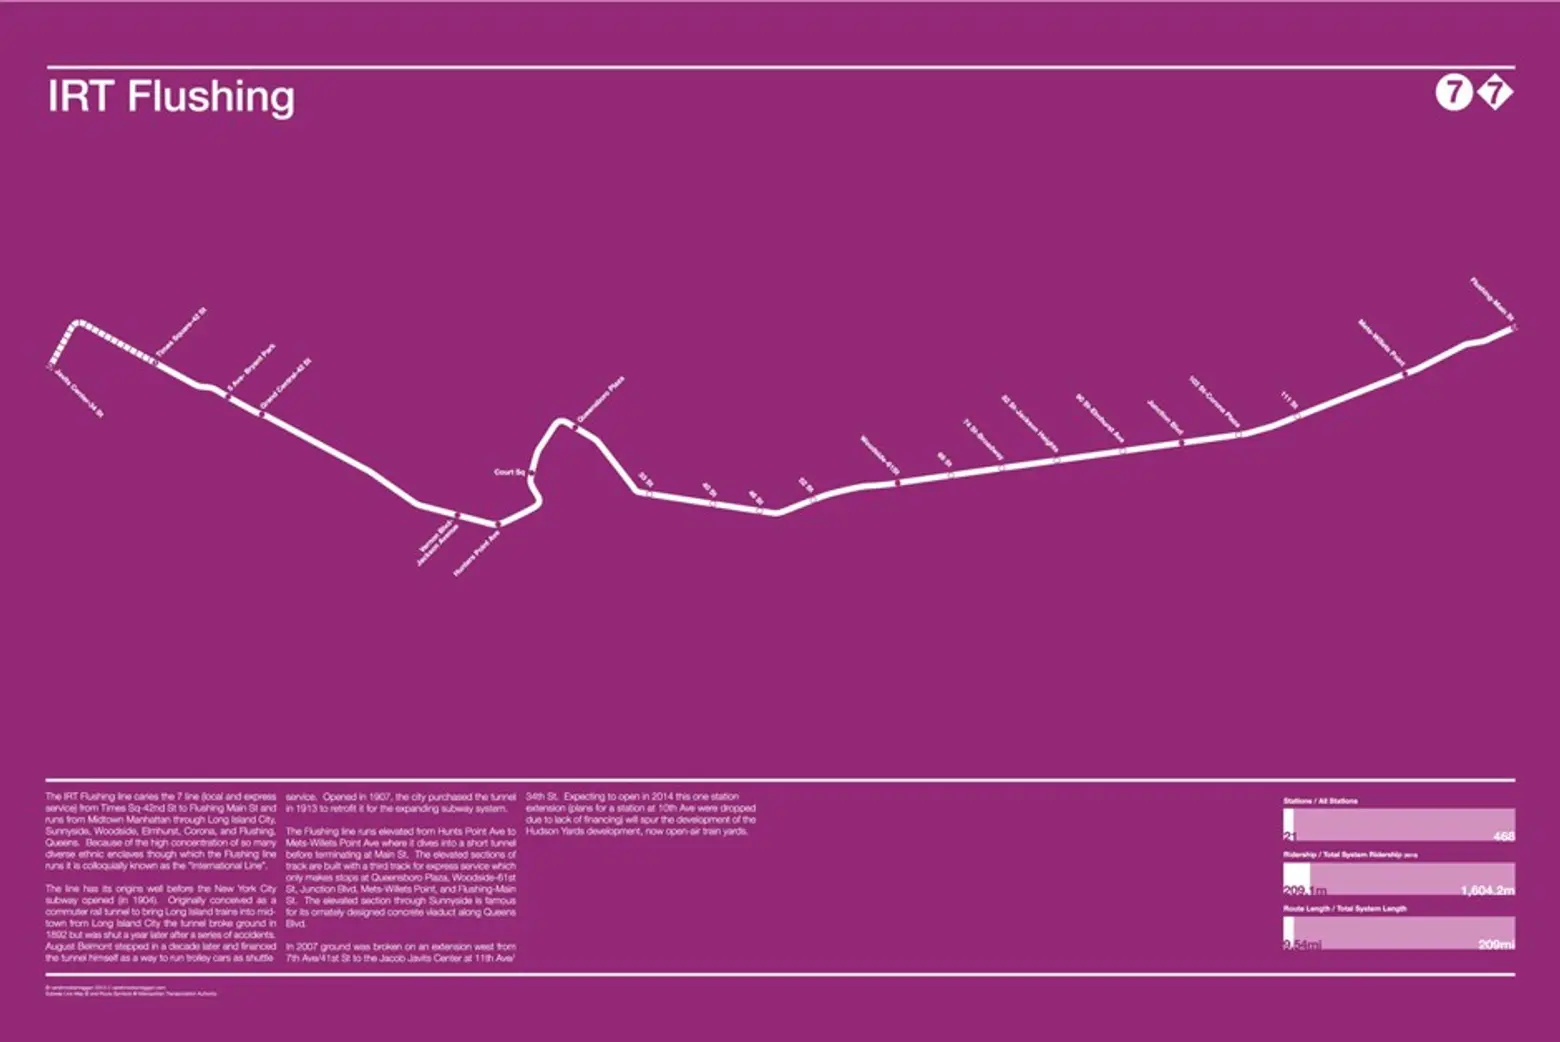 Minimalist Subway Map Posters Are More About Beautiful Design Than Finding Your Way